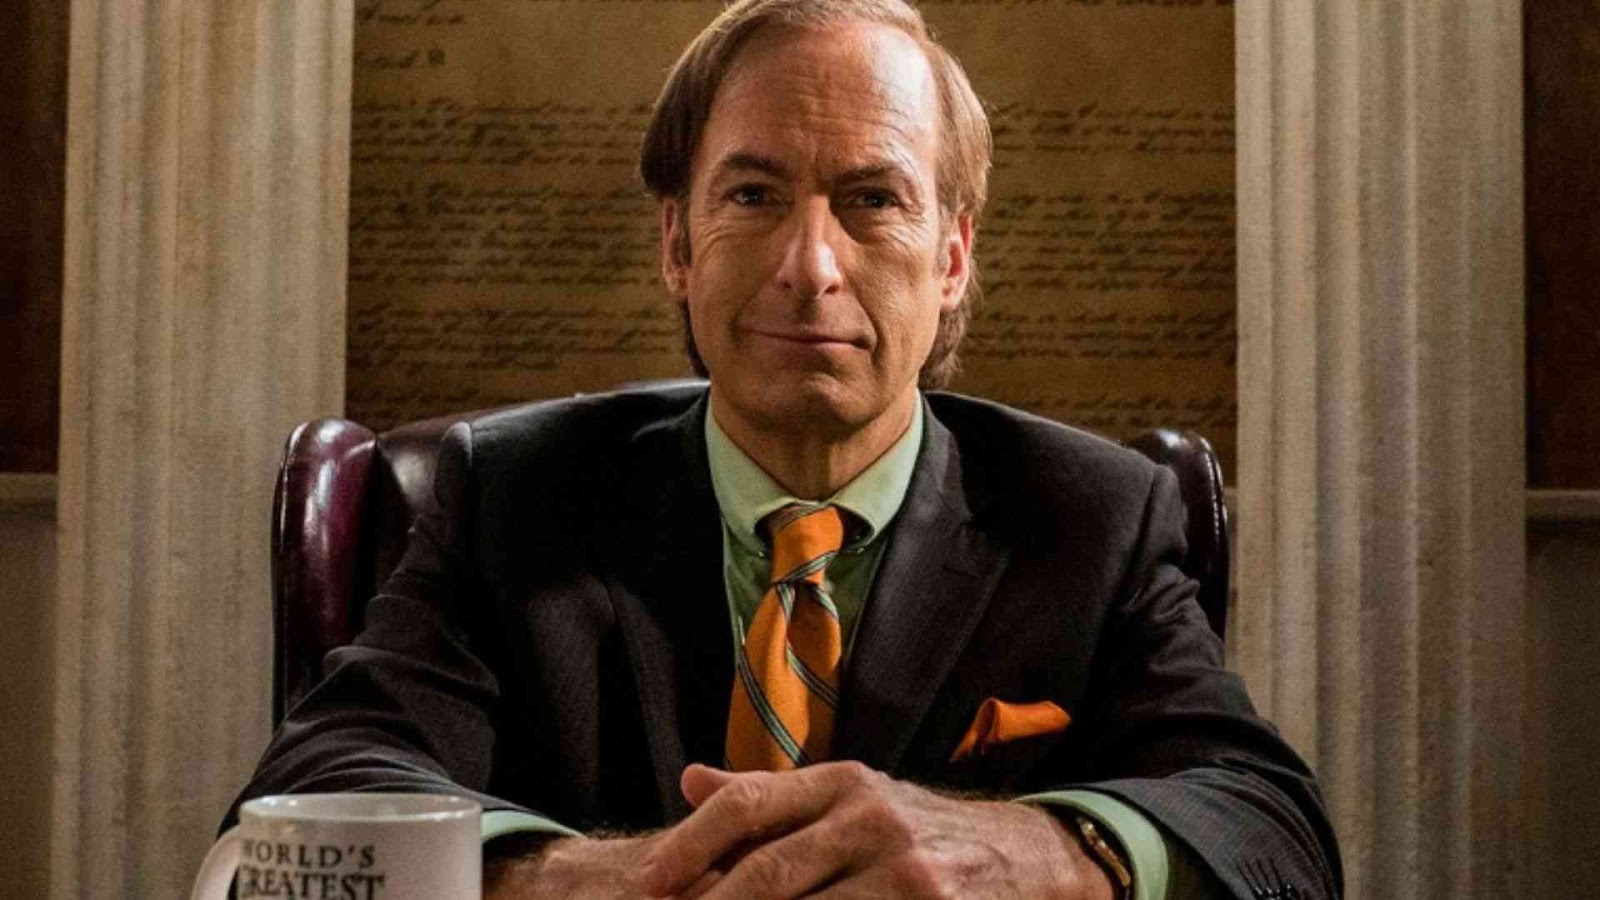 What is the net worth of the Fictional Character Saul Goodman